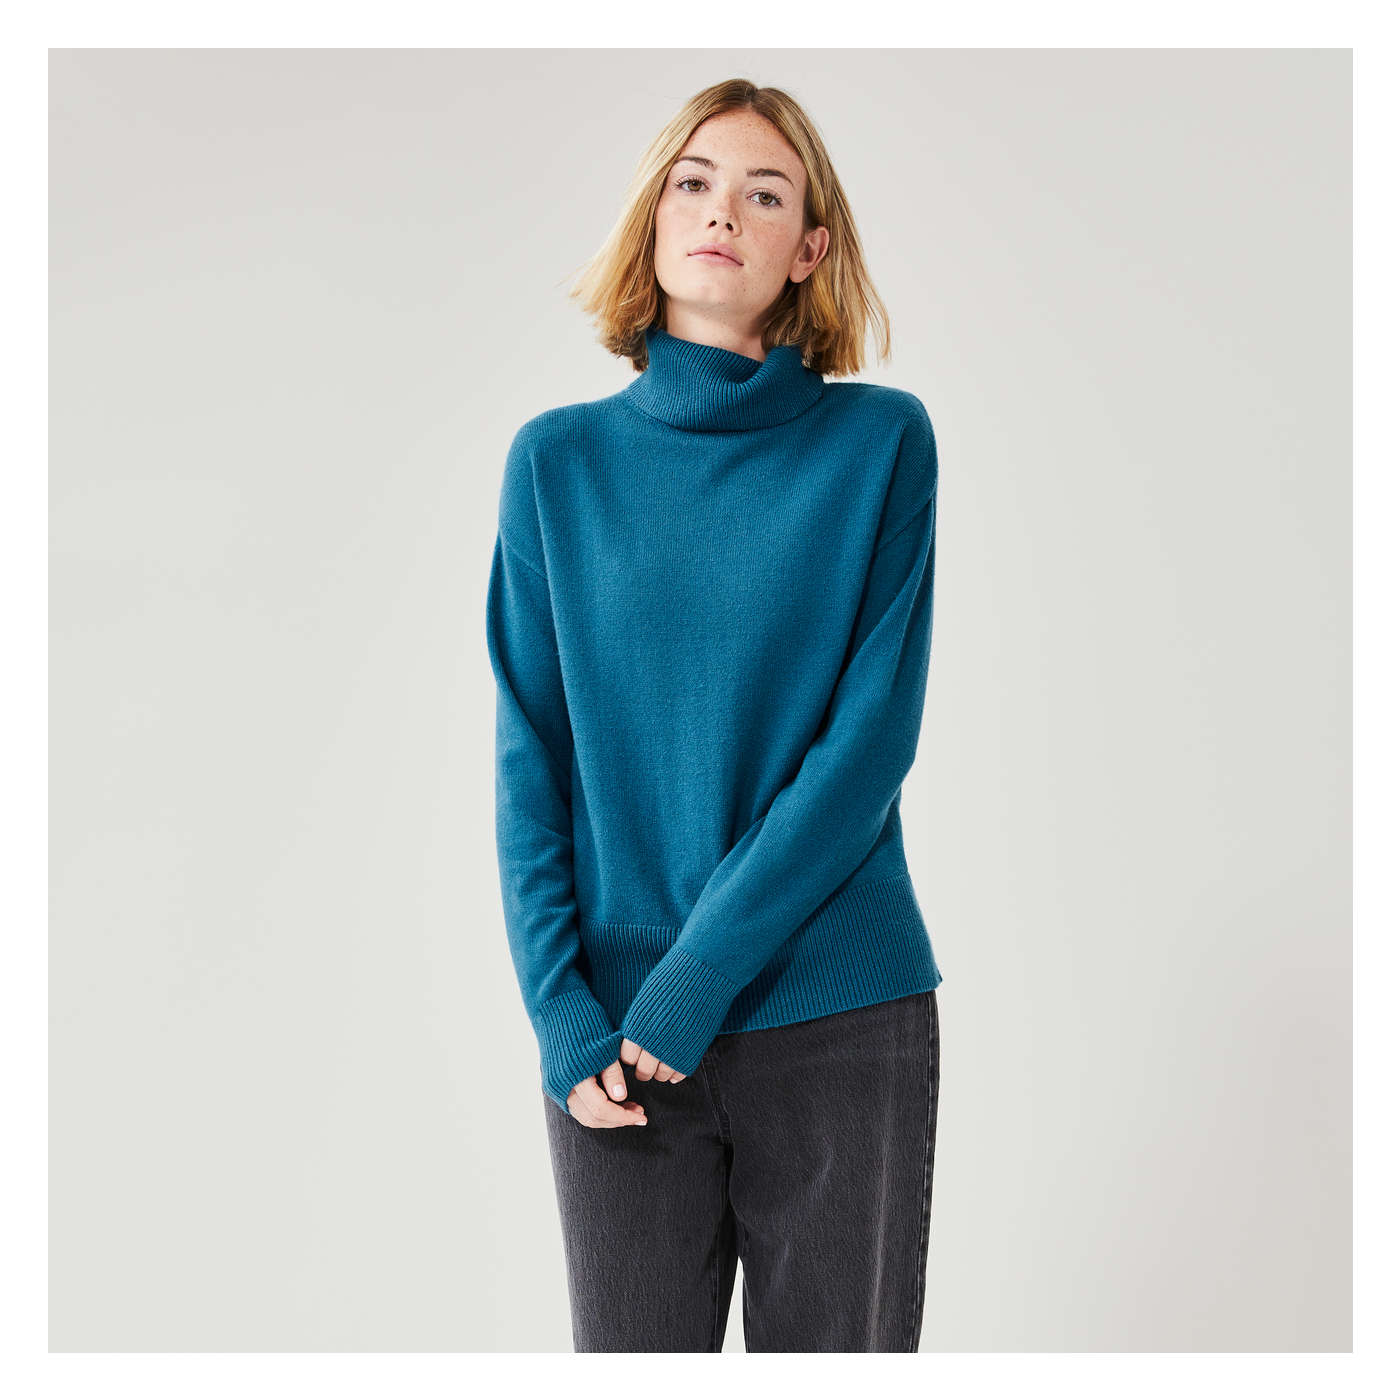 Turtleneck Pullover in Turquoise from Joe Fresh